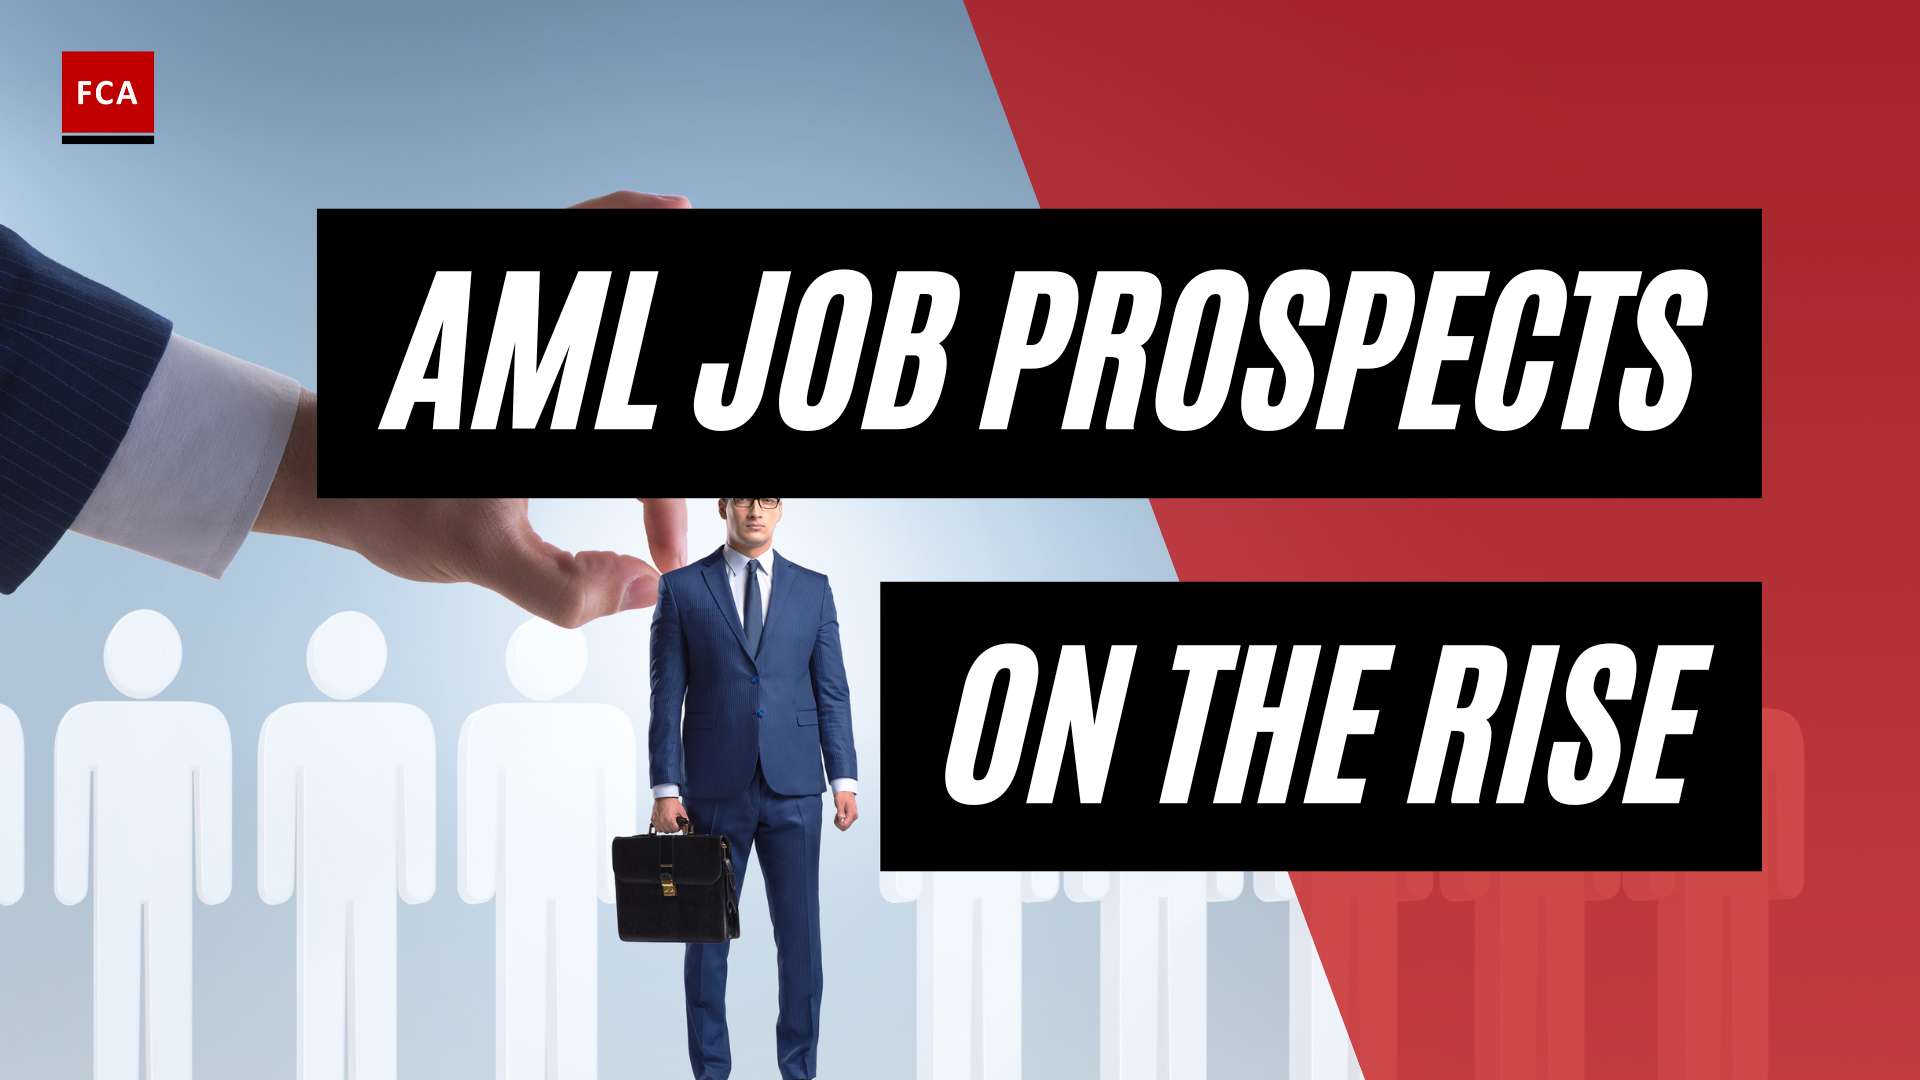 The Power Of Prevention: Aml Job Prospects On The Rise